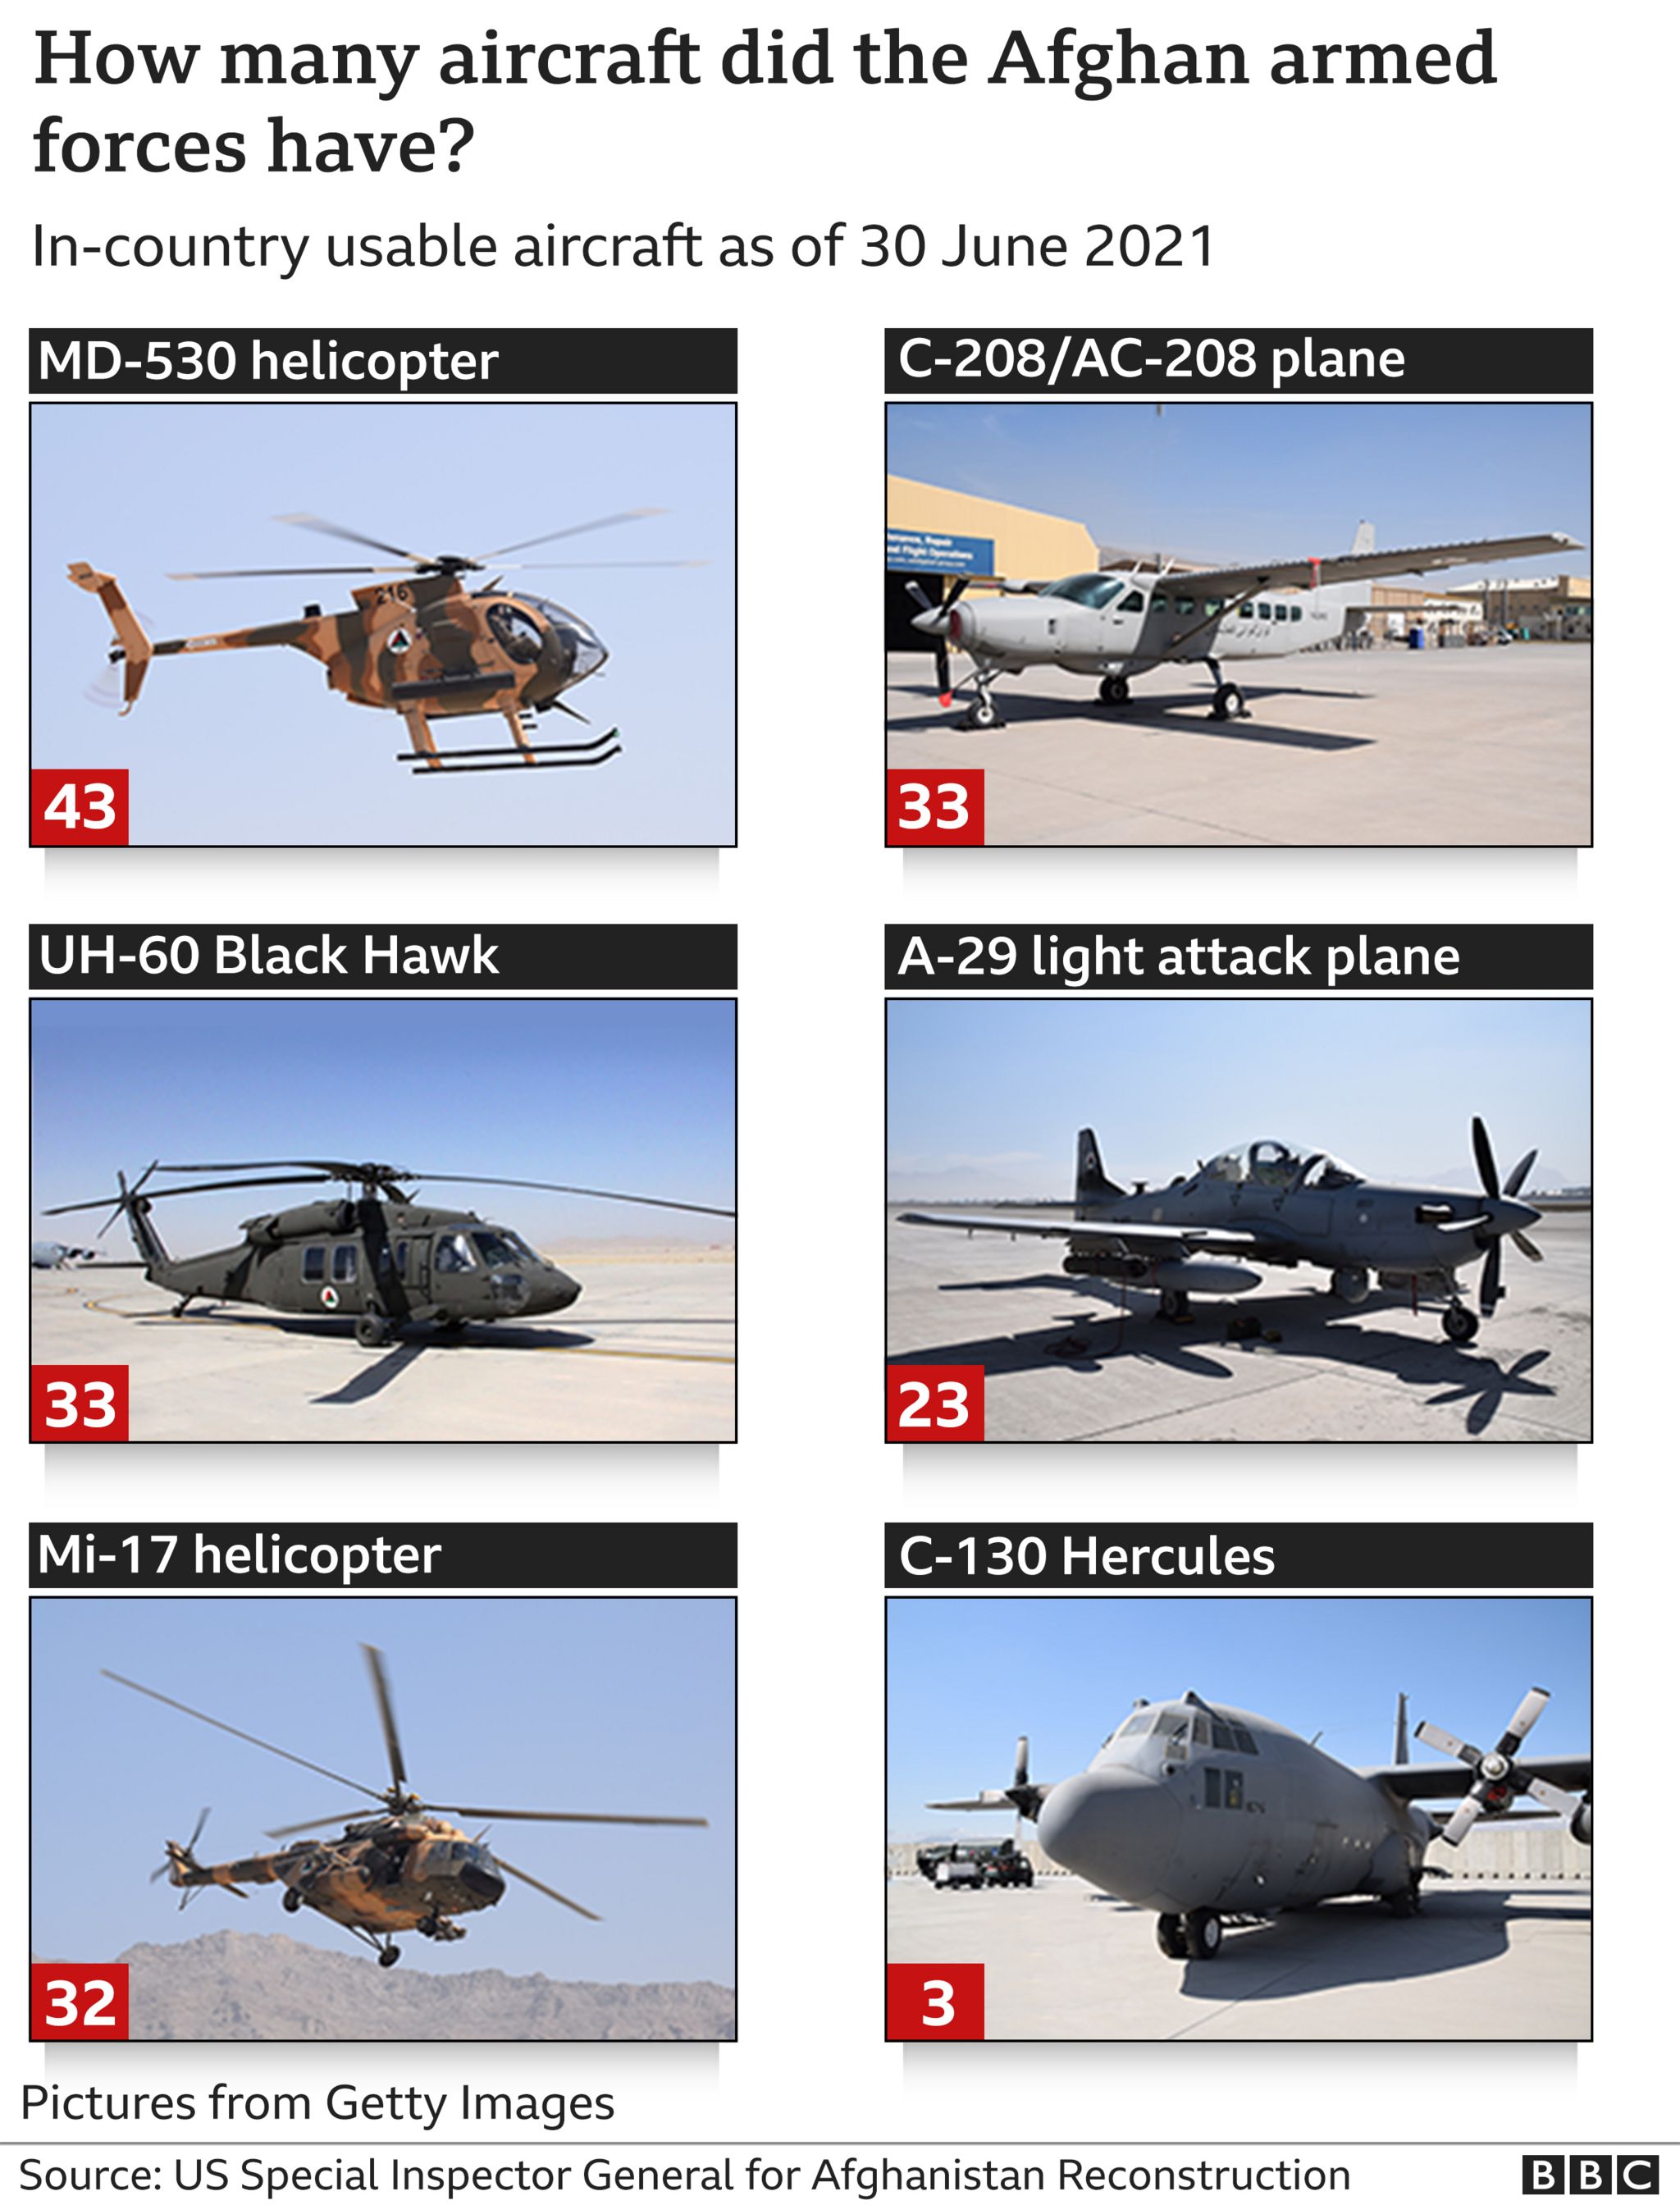 Graphic showing types and numbers of aircraft operated by the Afghan armed forces